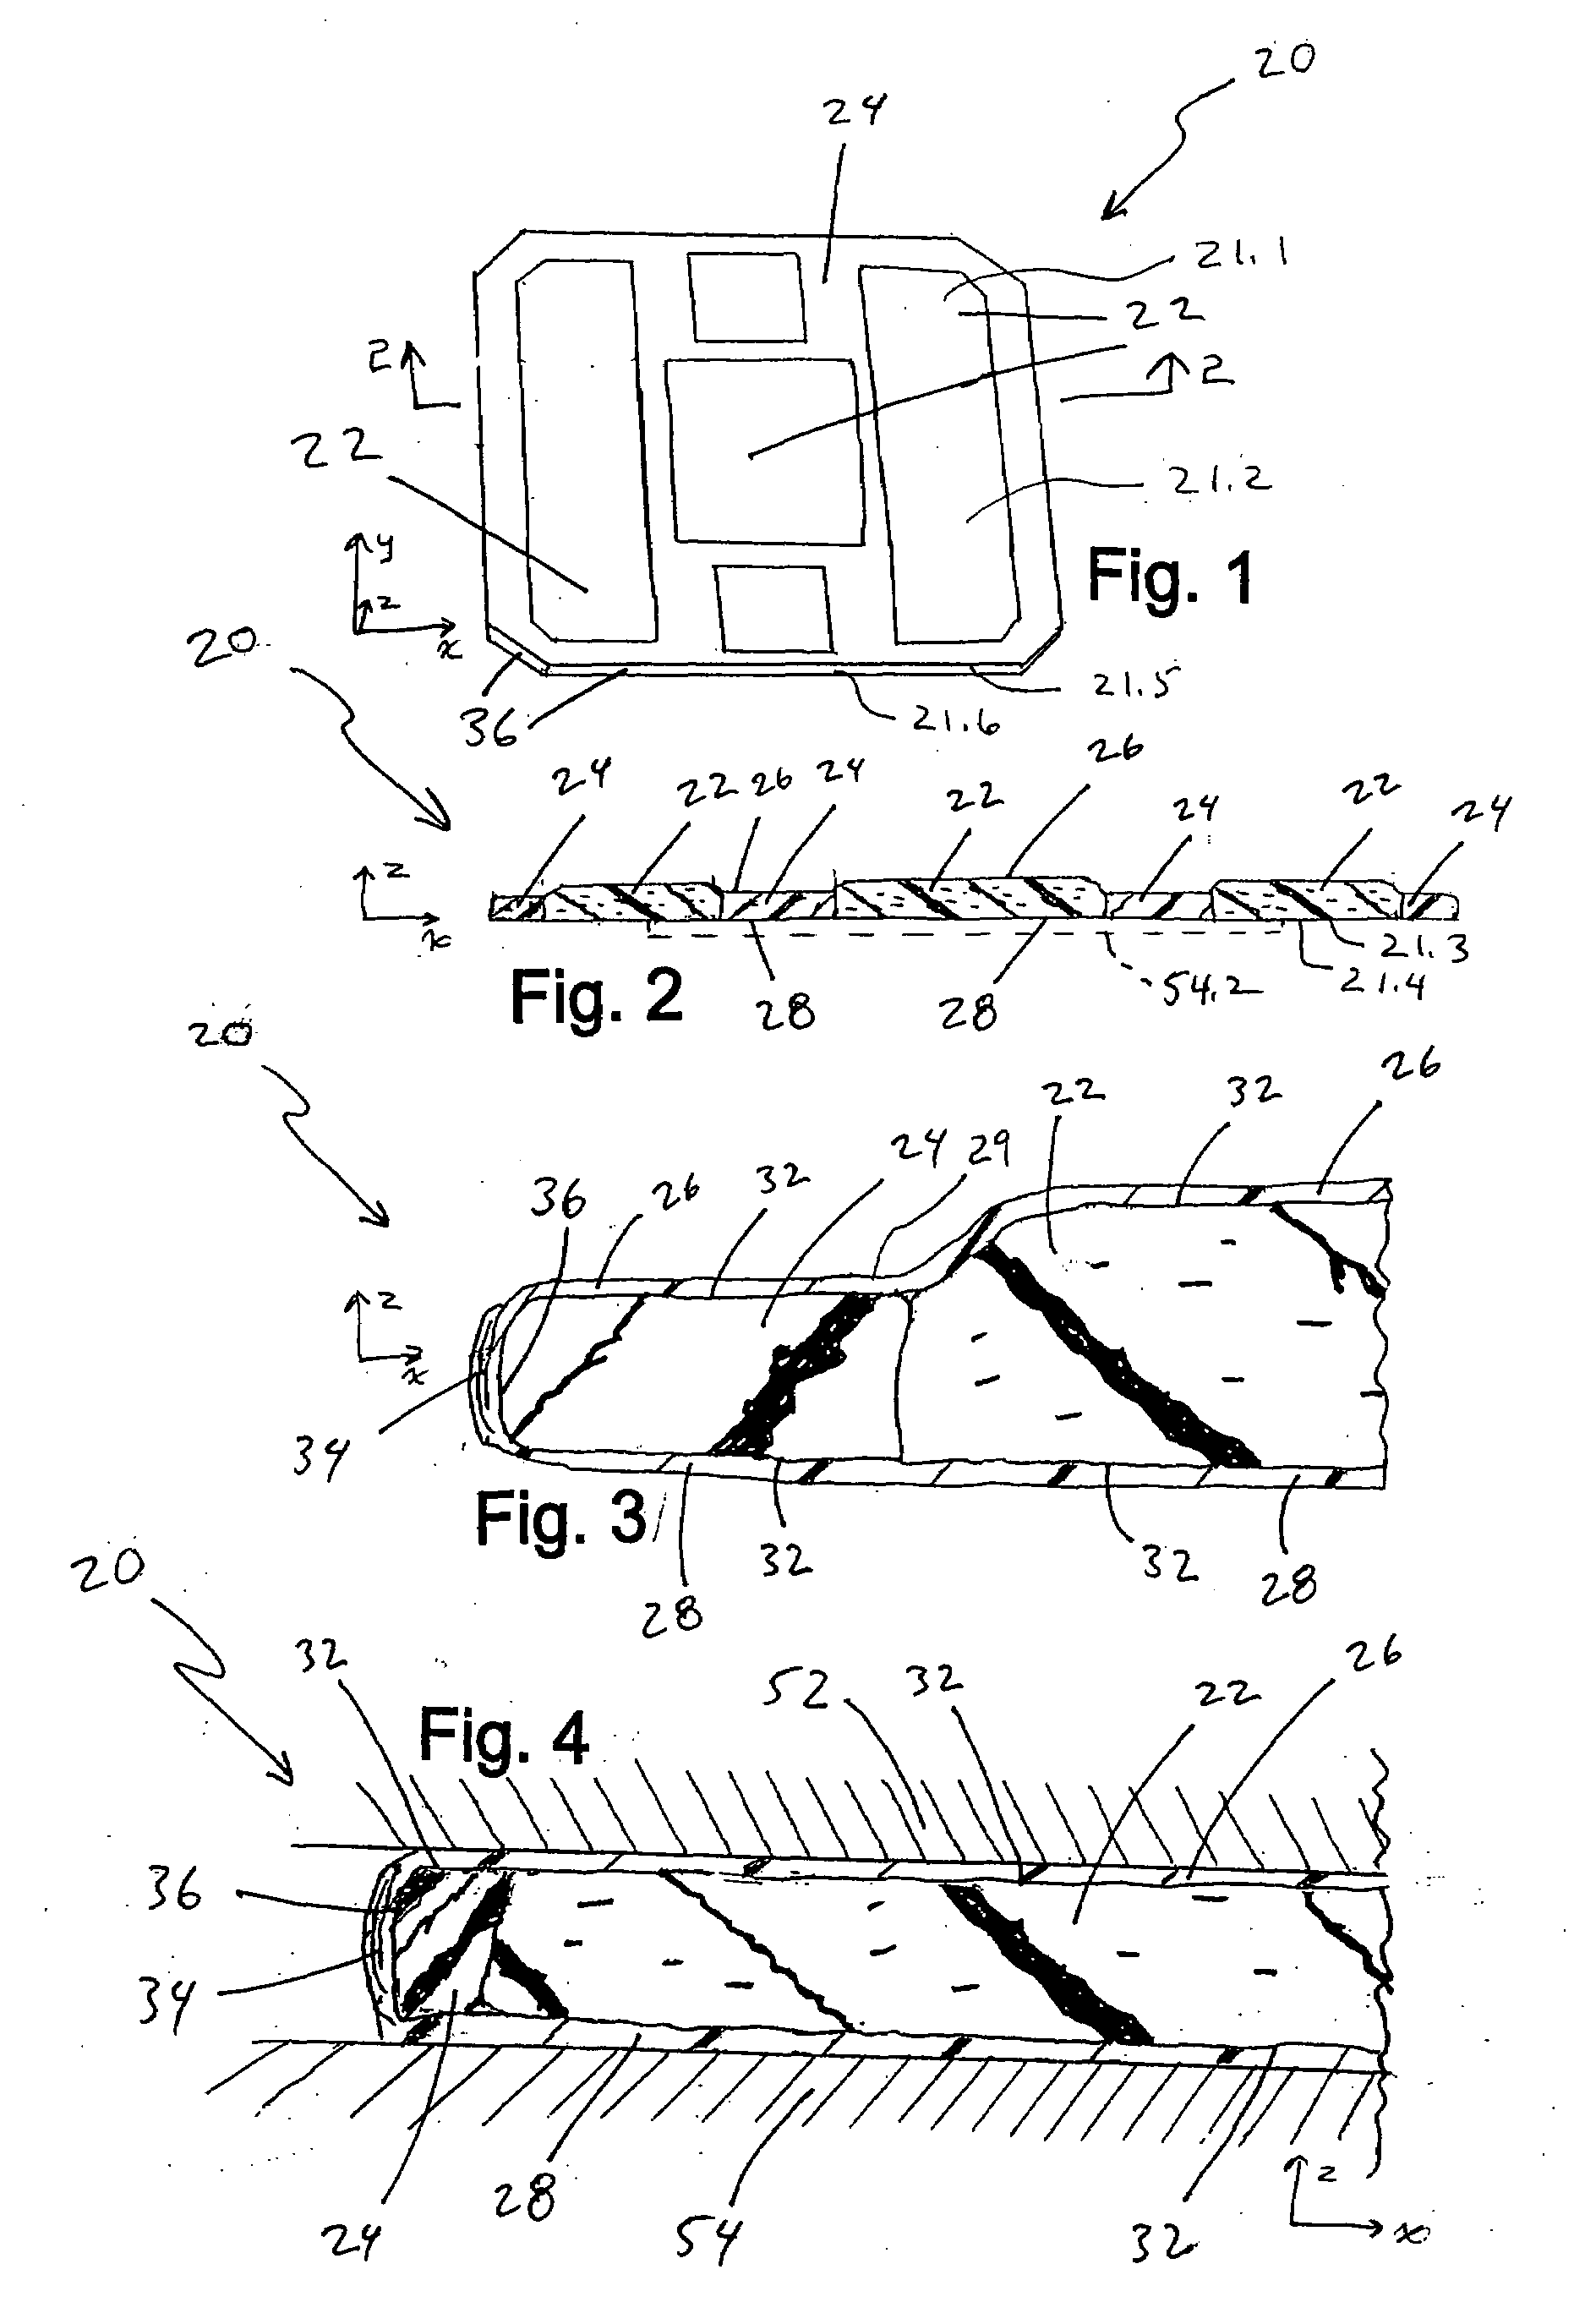 Sealed thermal interface component